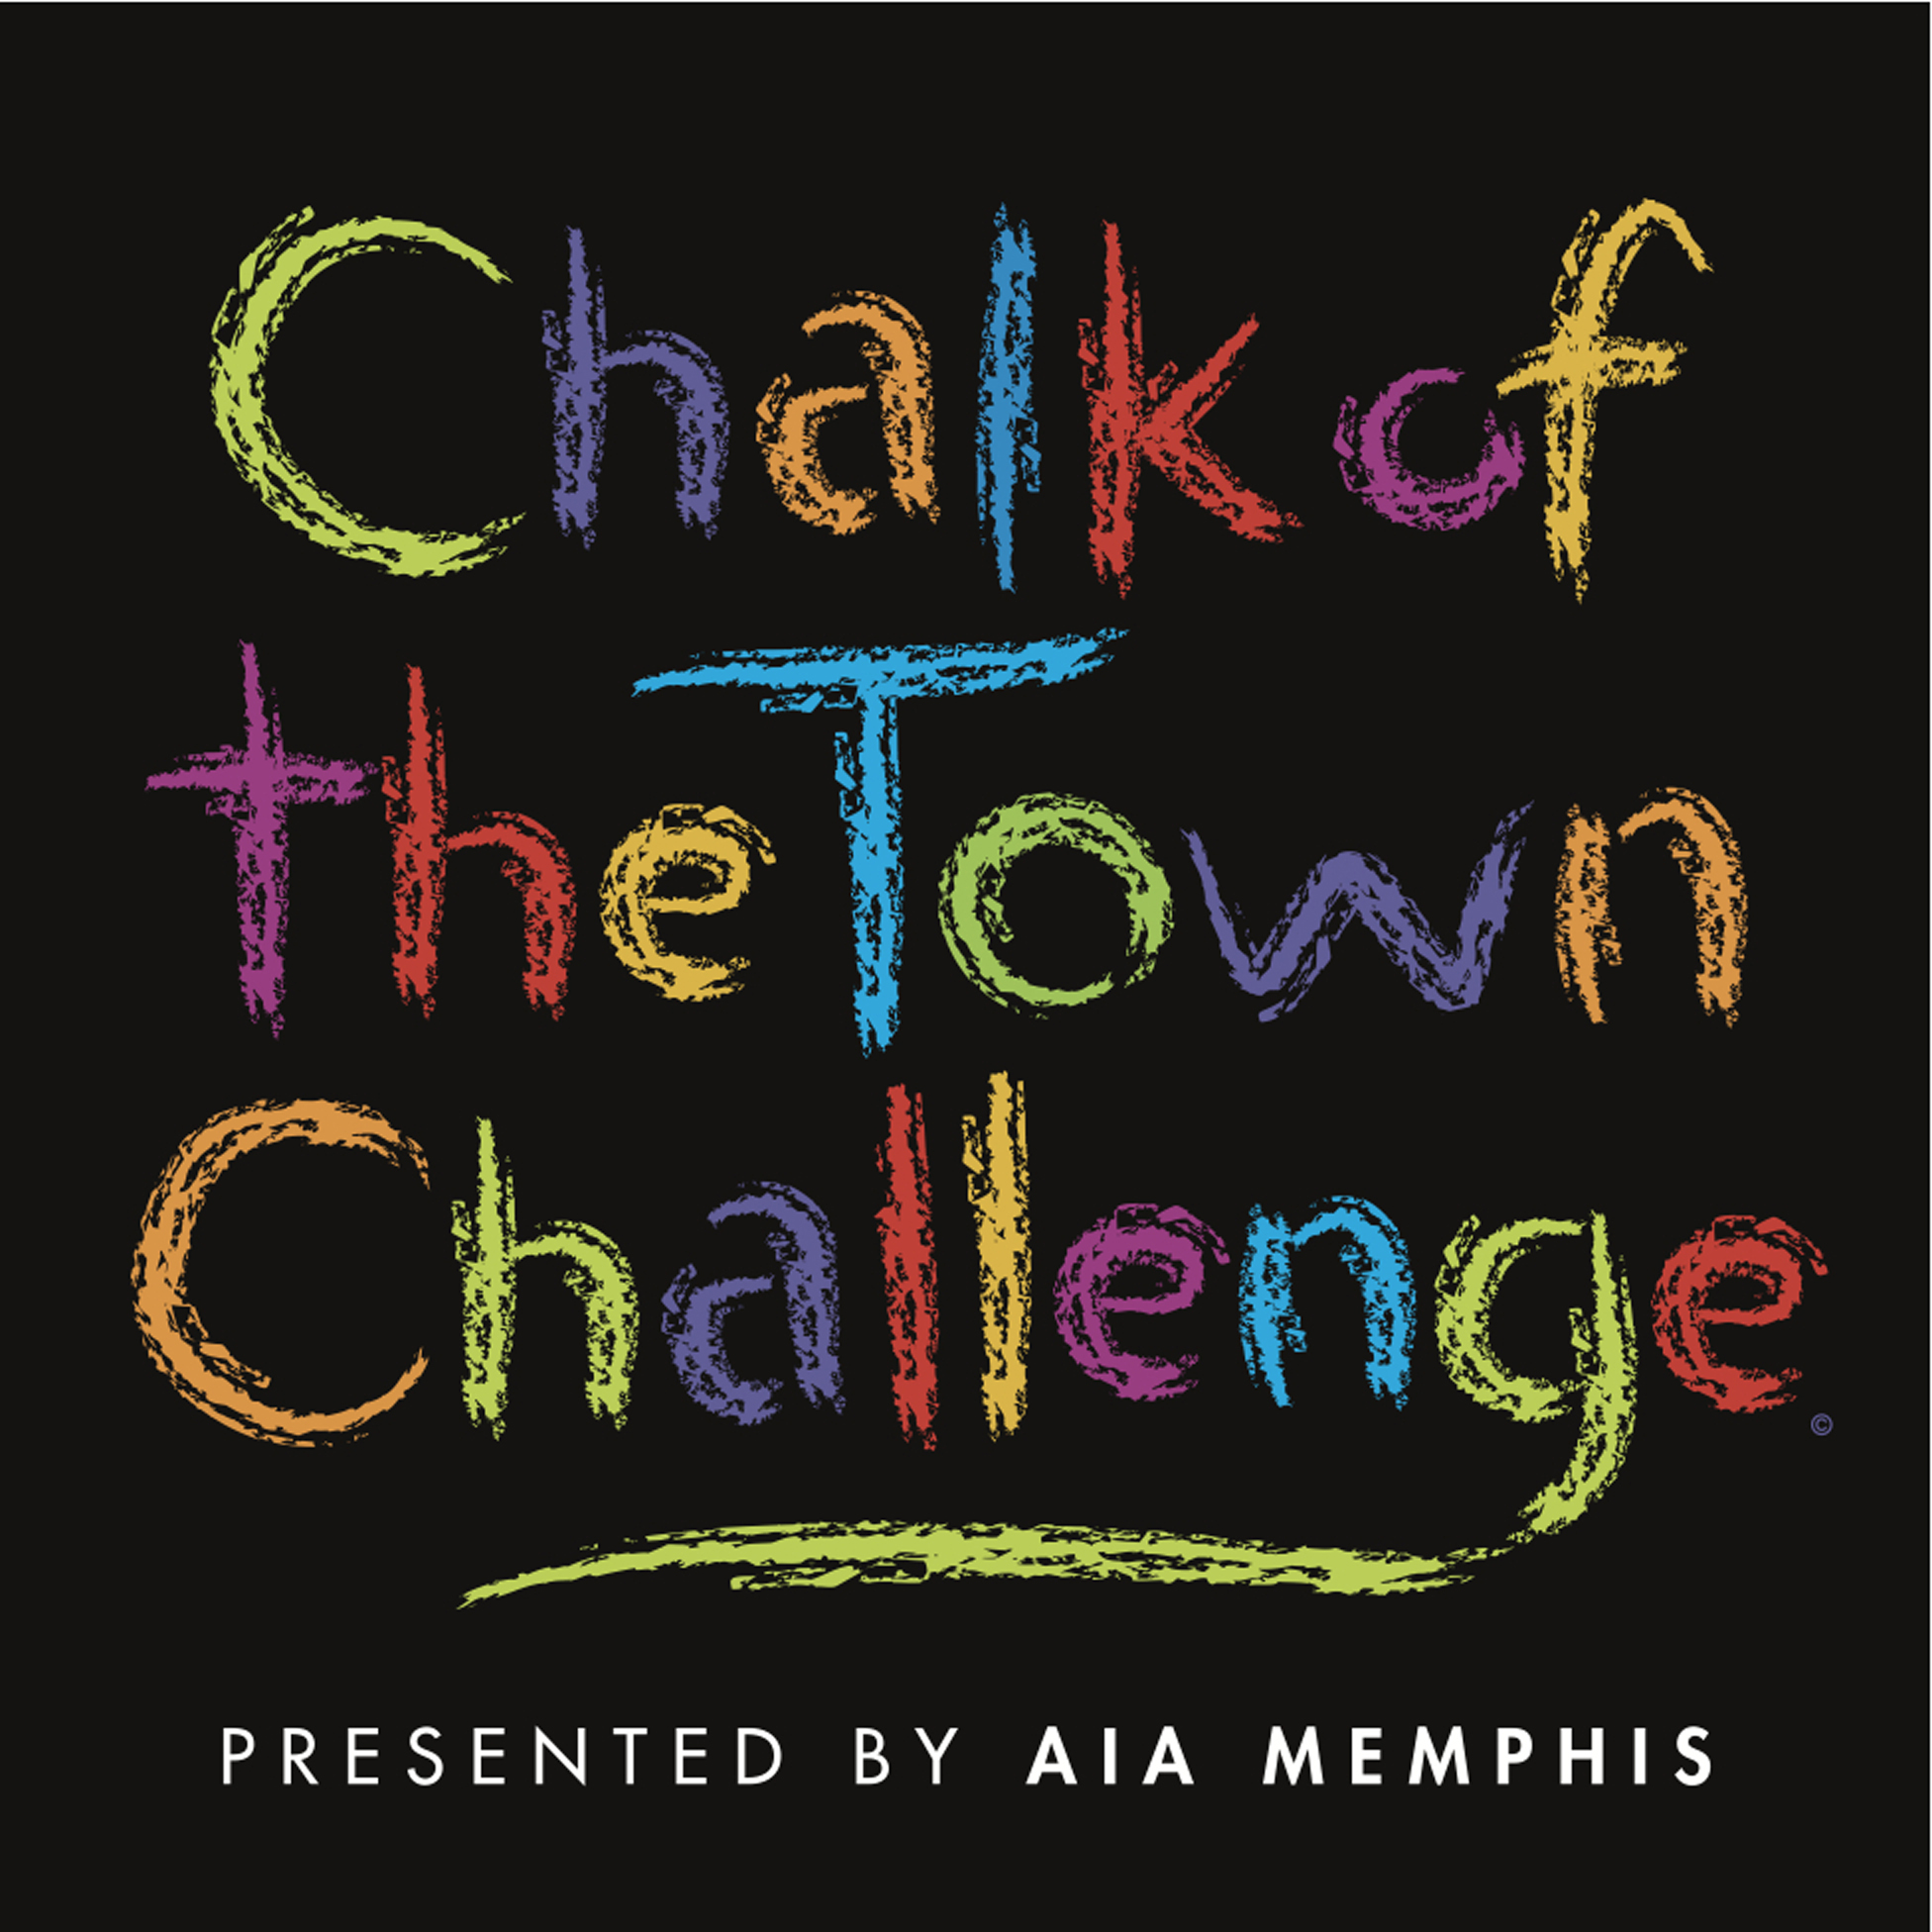  AIA Memphis  Branding creative, copywriting and design by Chuck Mitchell 